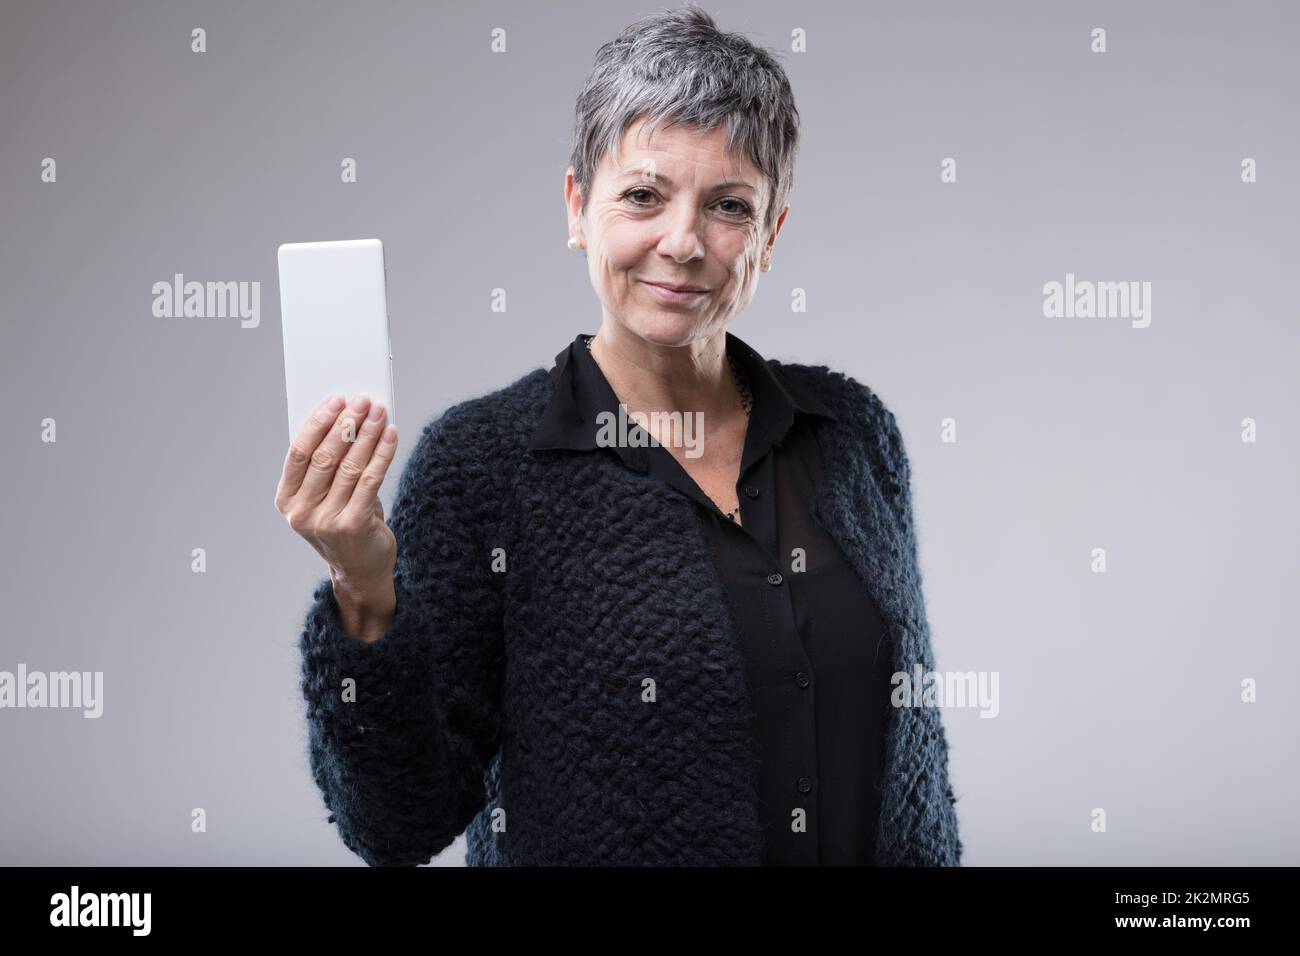 Older attractive woman holding up a mobile phone Stock Photo